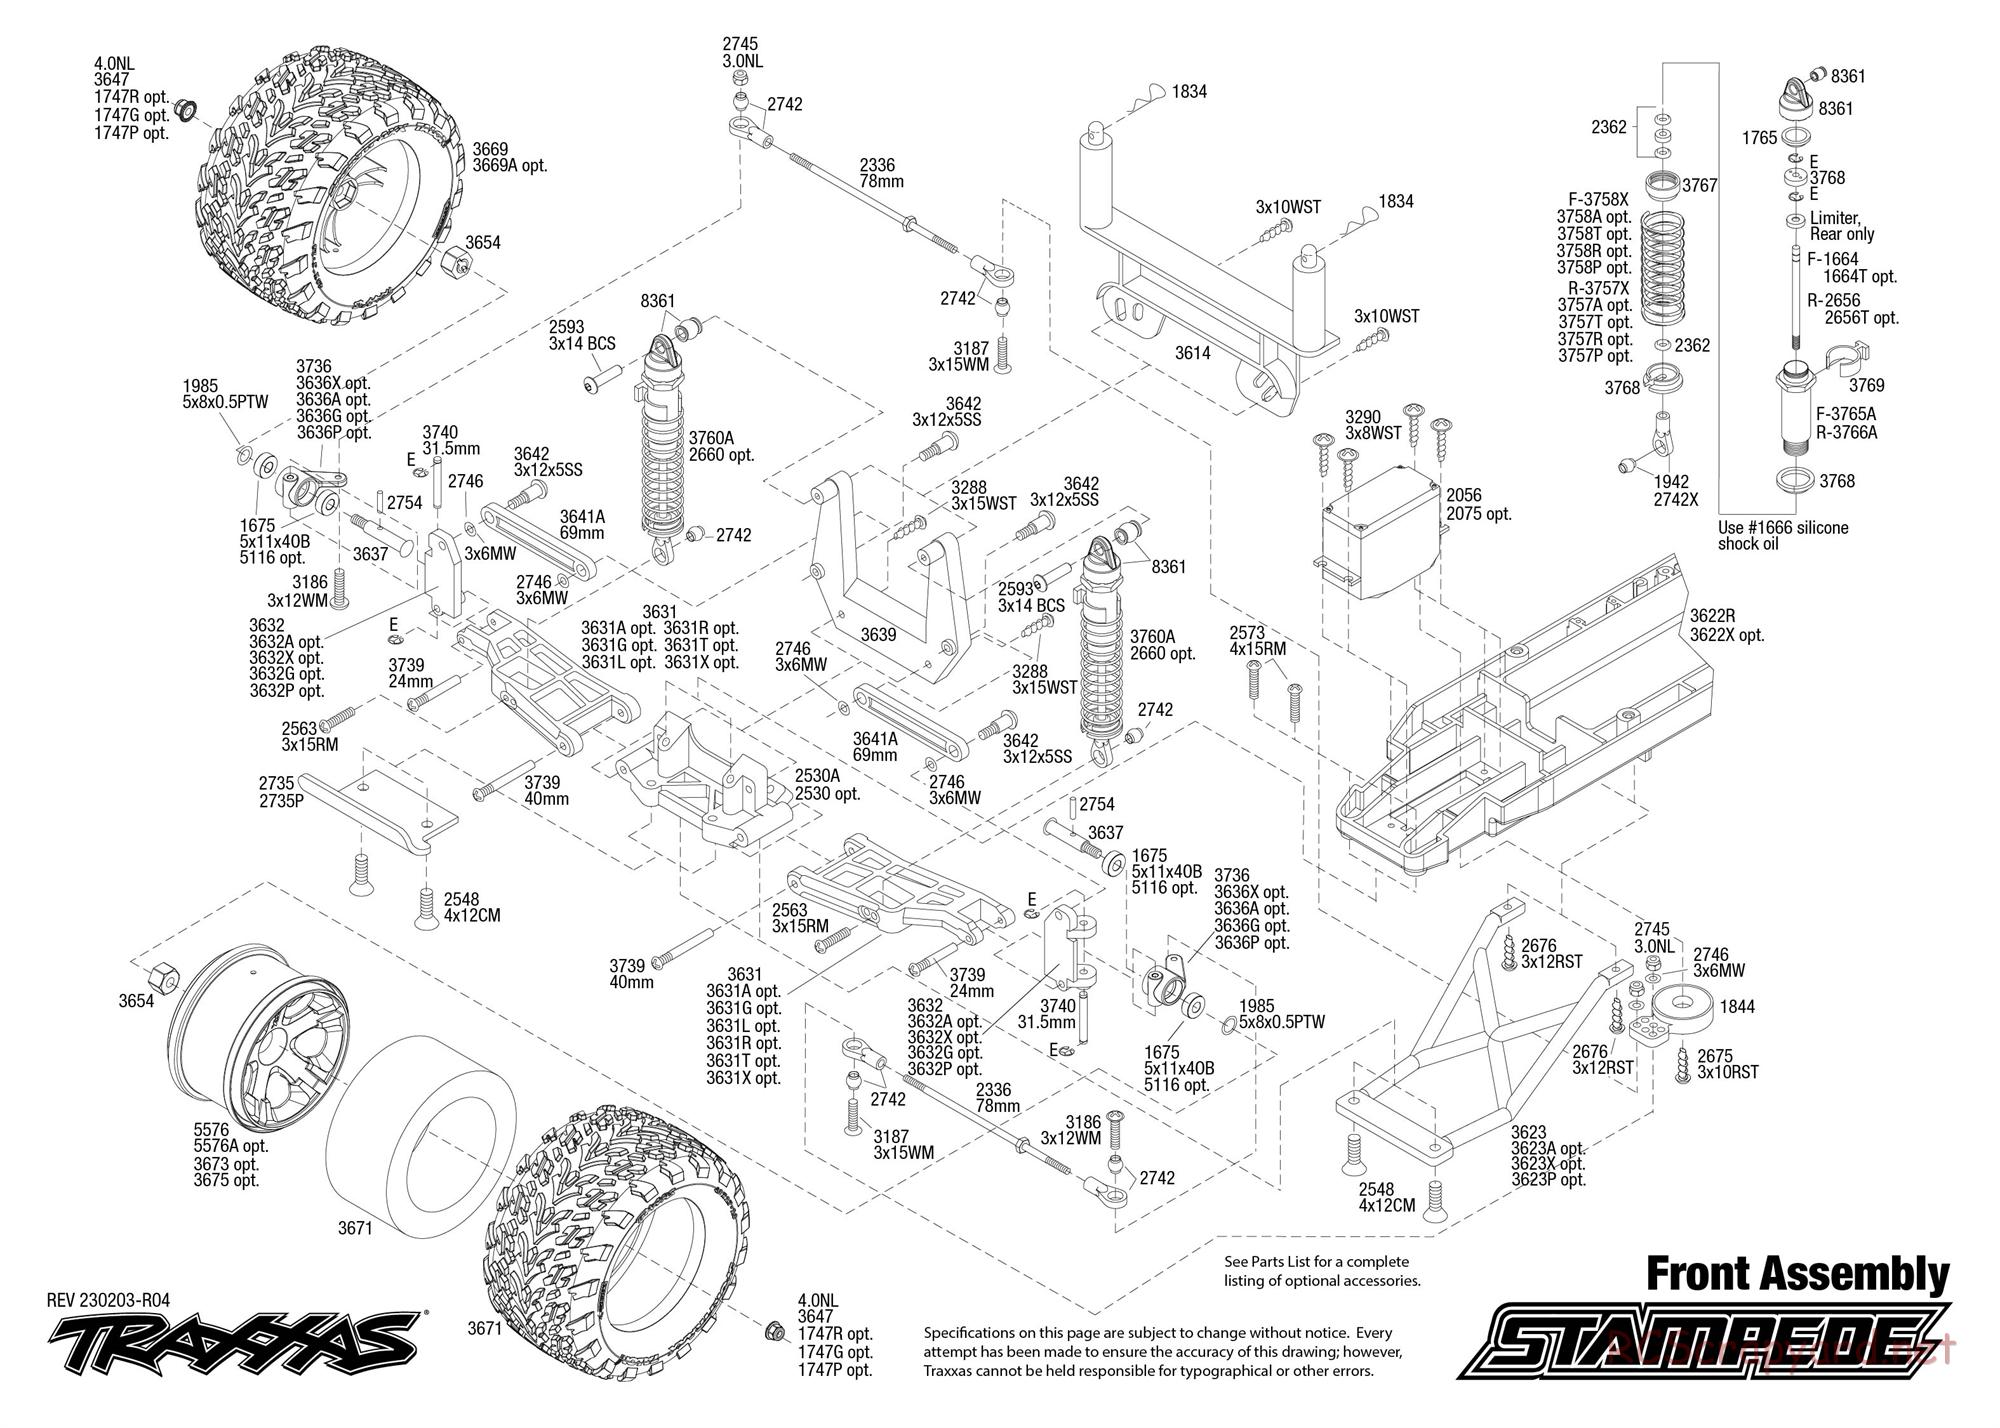 Traxxas - Stampede XL-5 (2018) - Exploded Views - Page 3